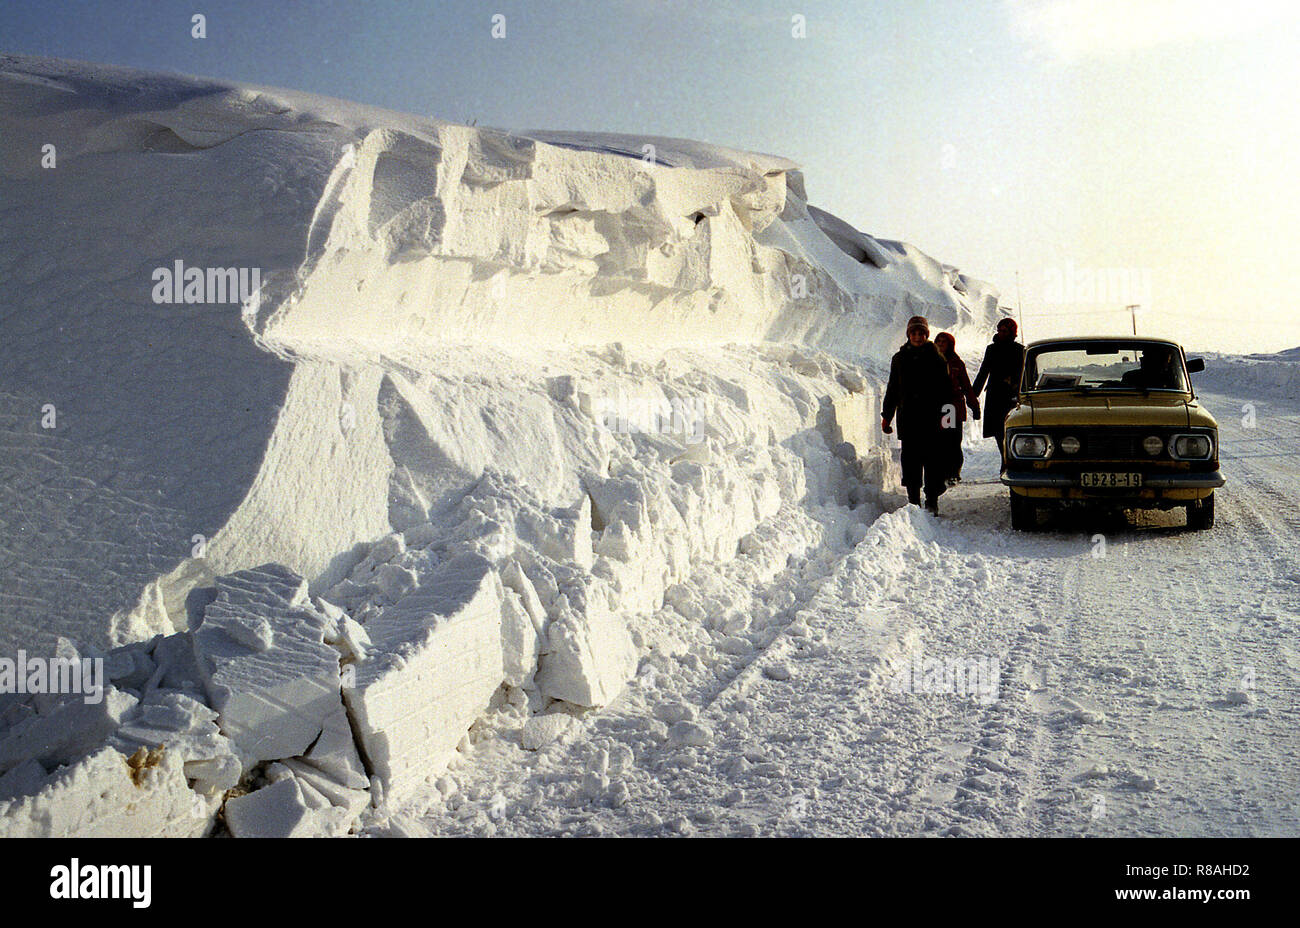 Person next to a car on a meter-high snowdrift on the road F96